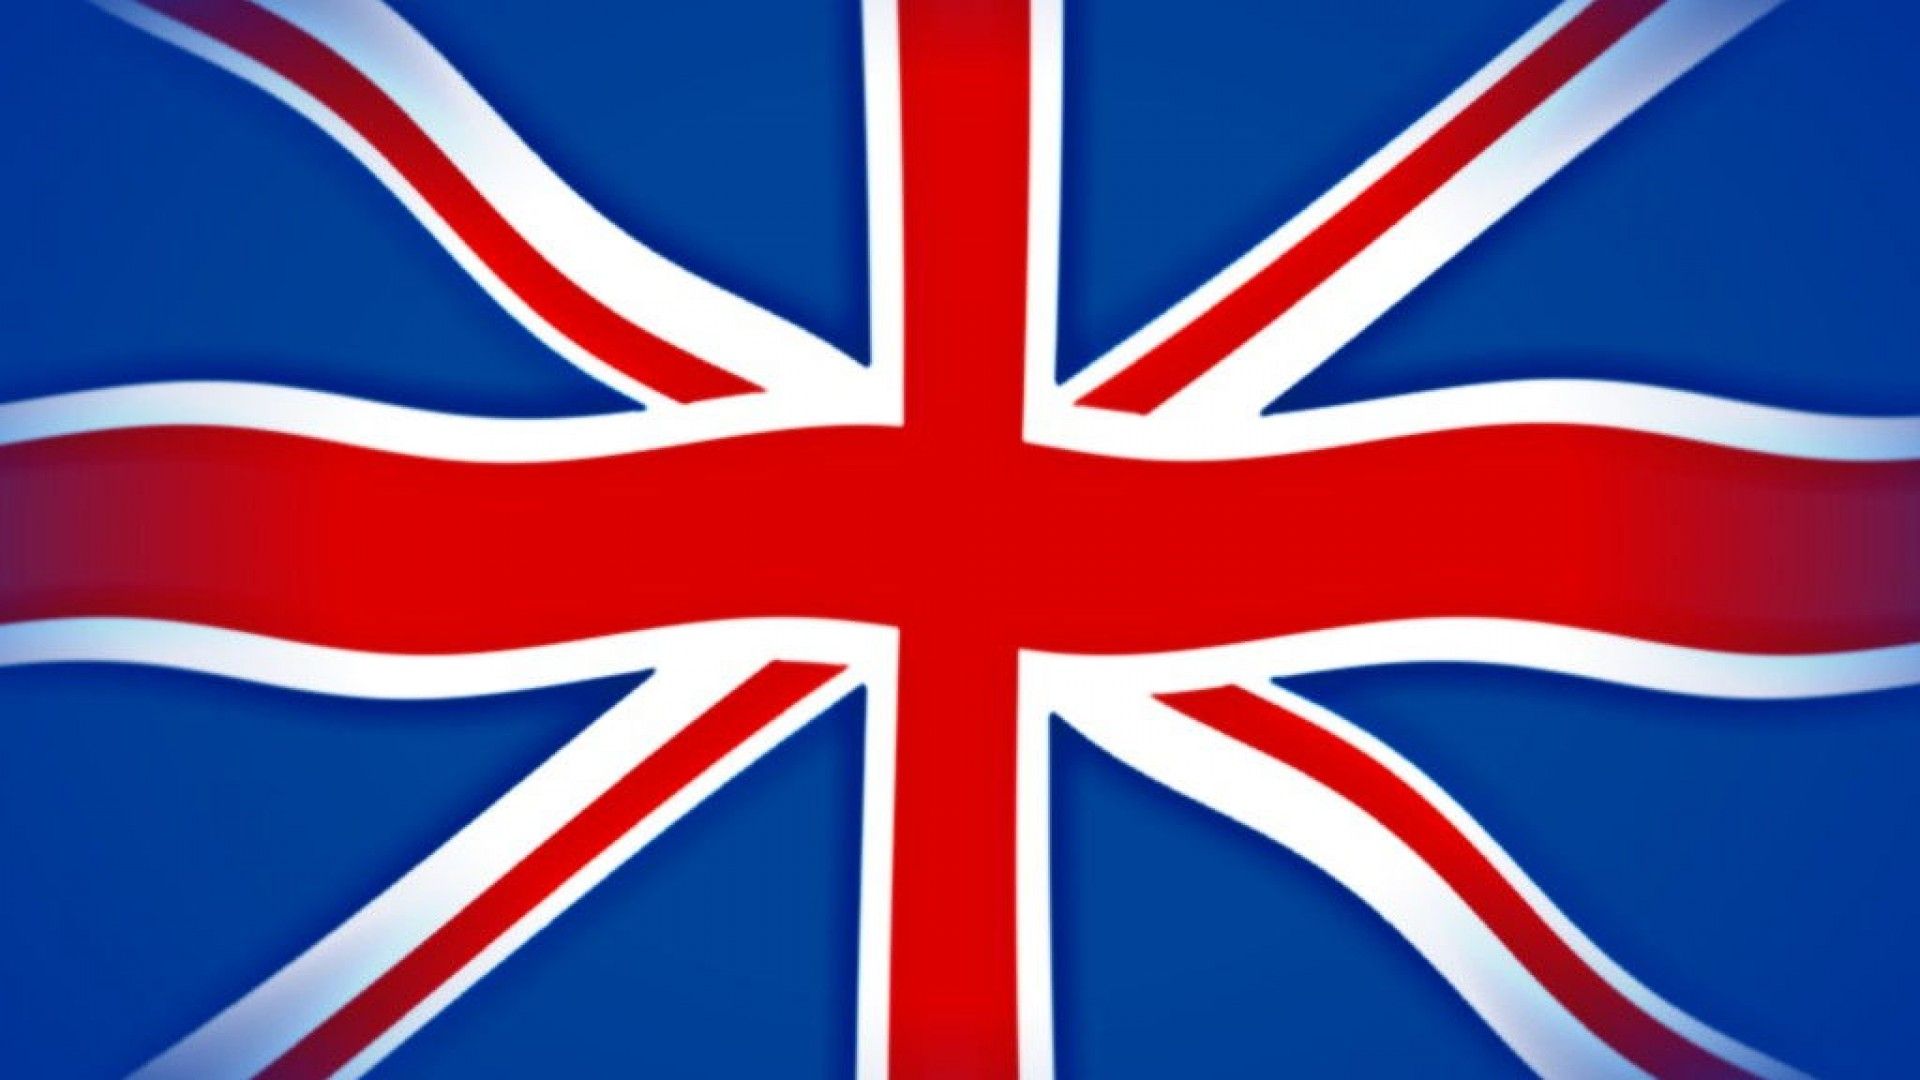 Images For Union Jack Iphone Wallpaper